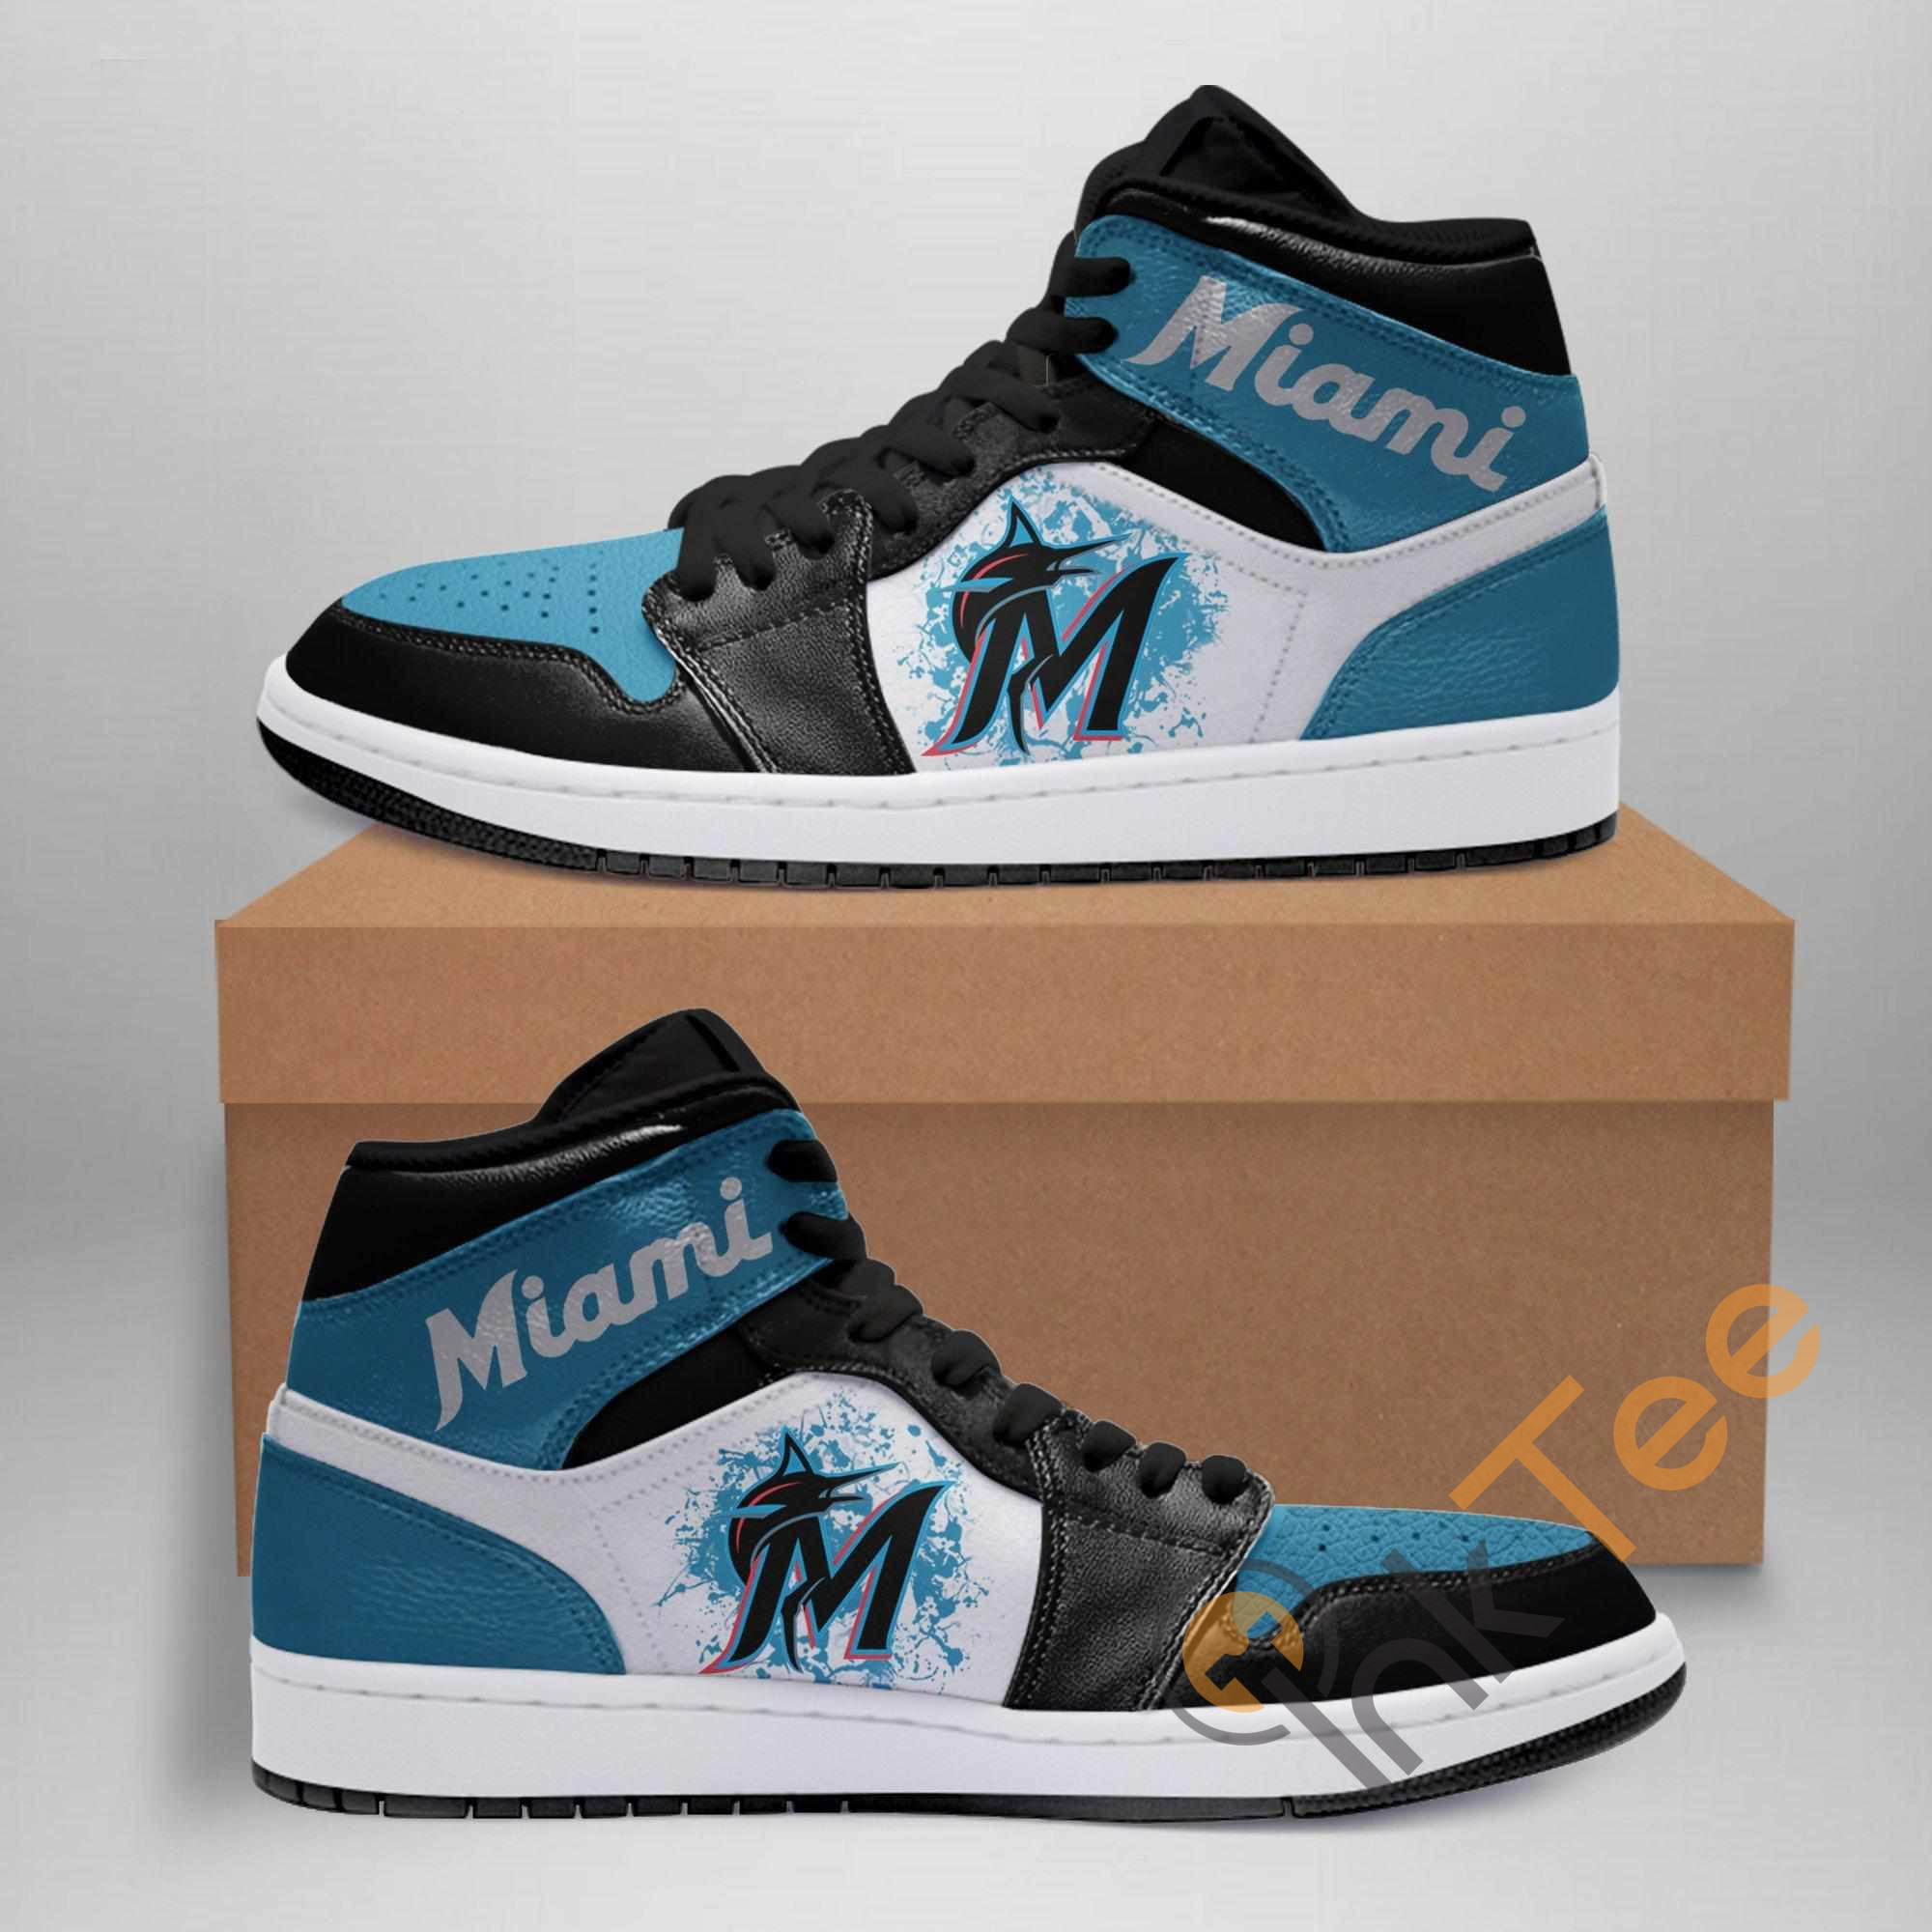 Miami Marlins Fan Unofficial Running Shoes sneakers trainers Unisex